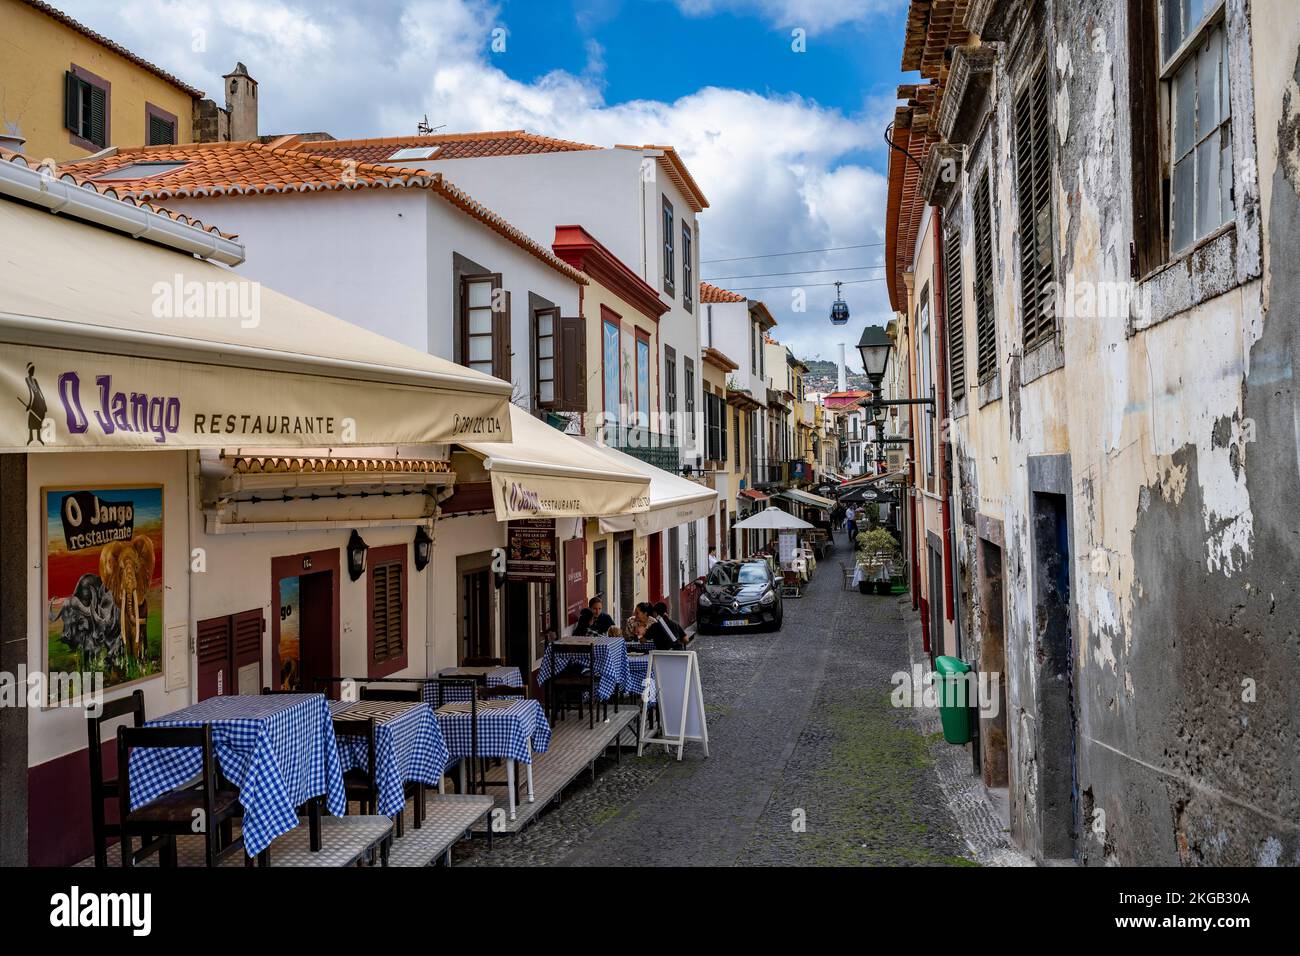 Alley with restaurants in the old town, Rua de Santa Maria, Old Town, Funchal Madeira, Portugal, Europe Stock Photo